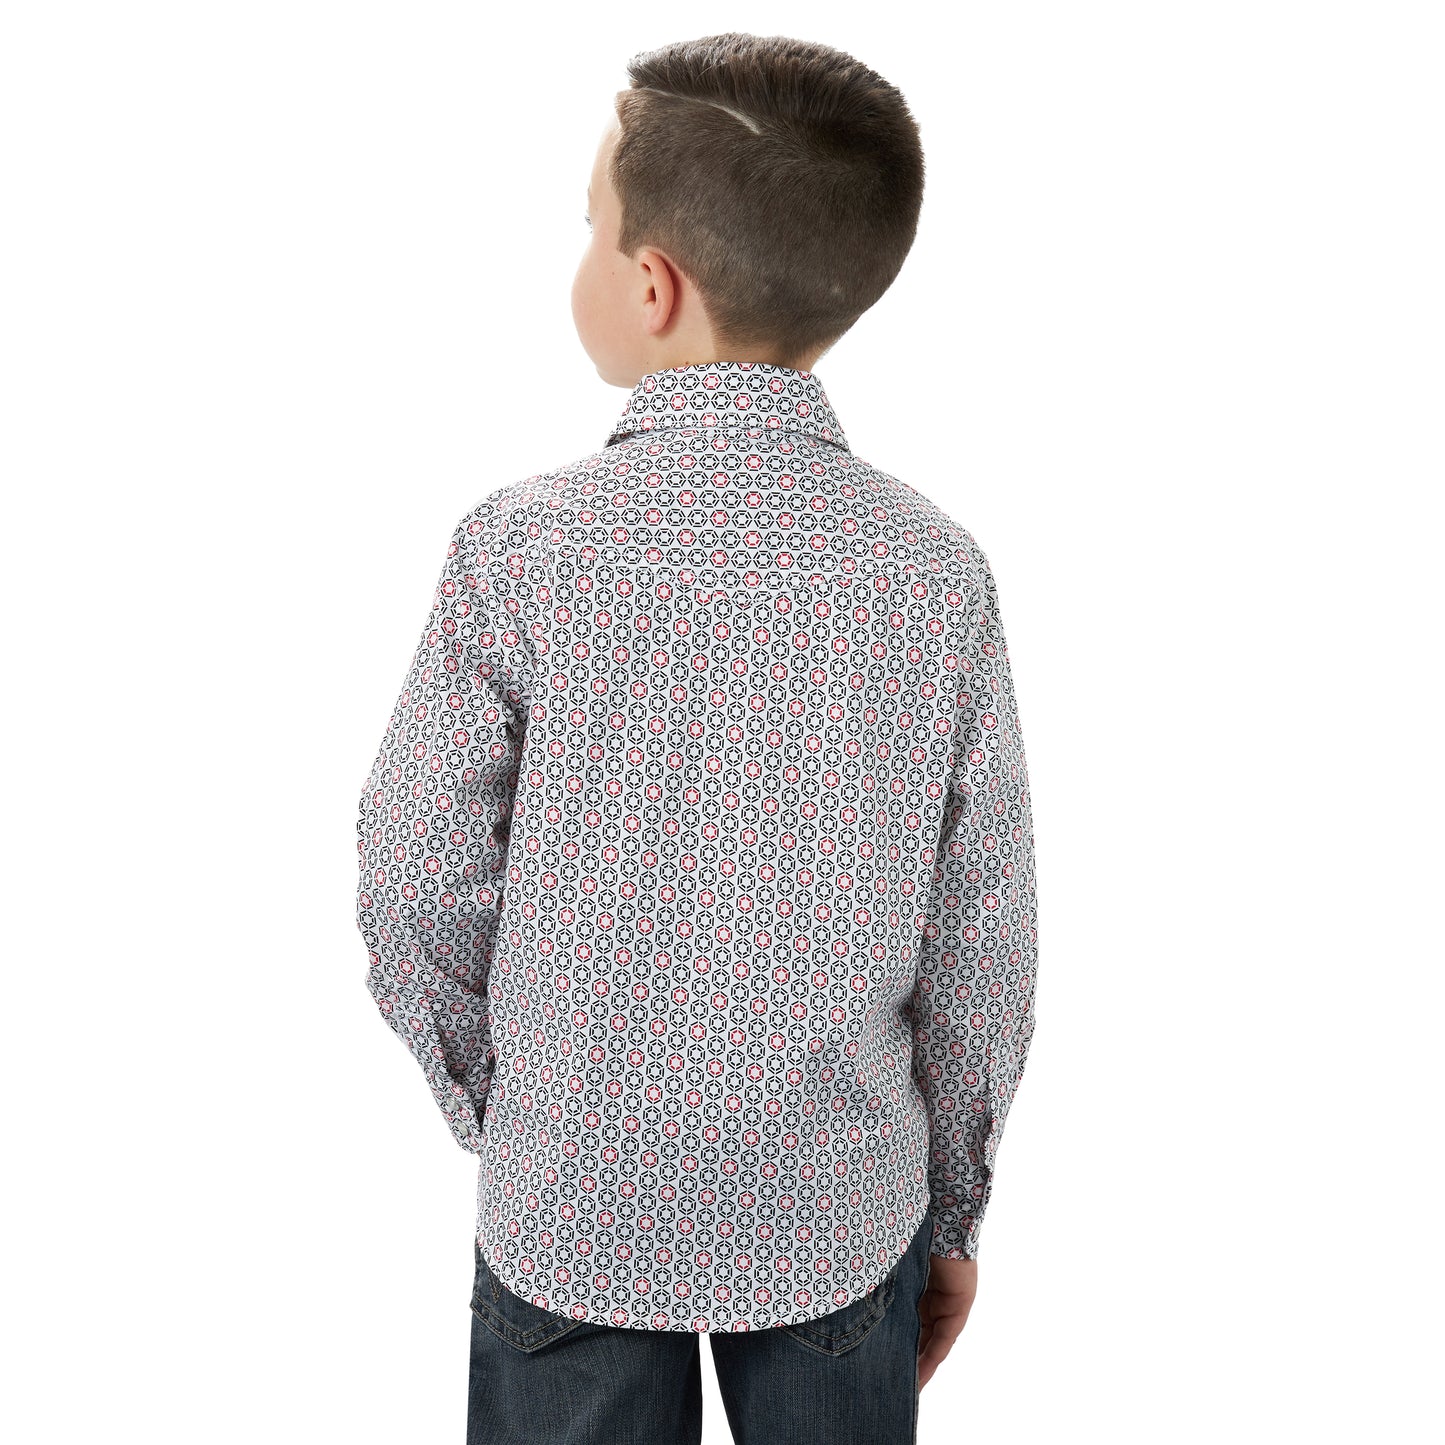 bjc328m Boy's 20X Competition Advanced Comfort Long Sleeve Snap Shirt by Wrangler